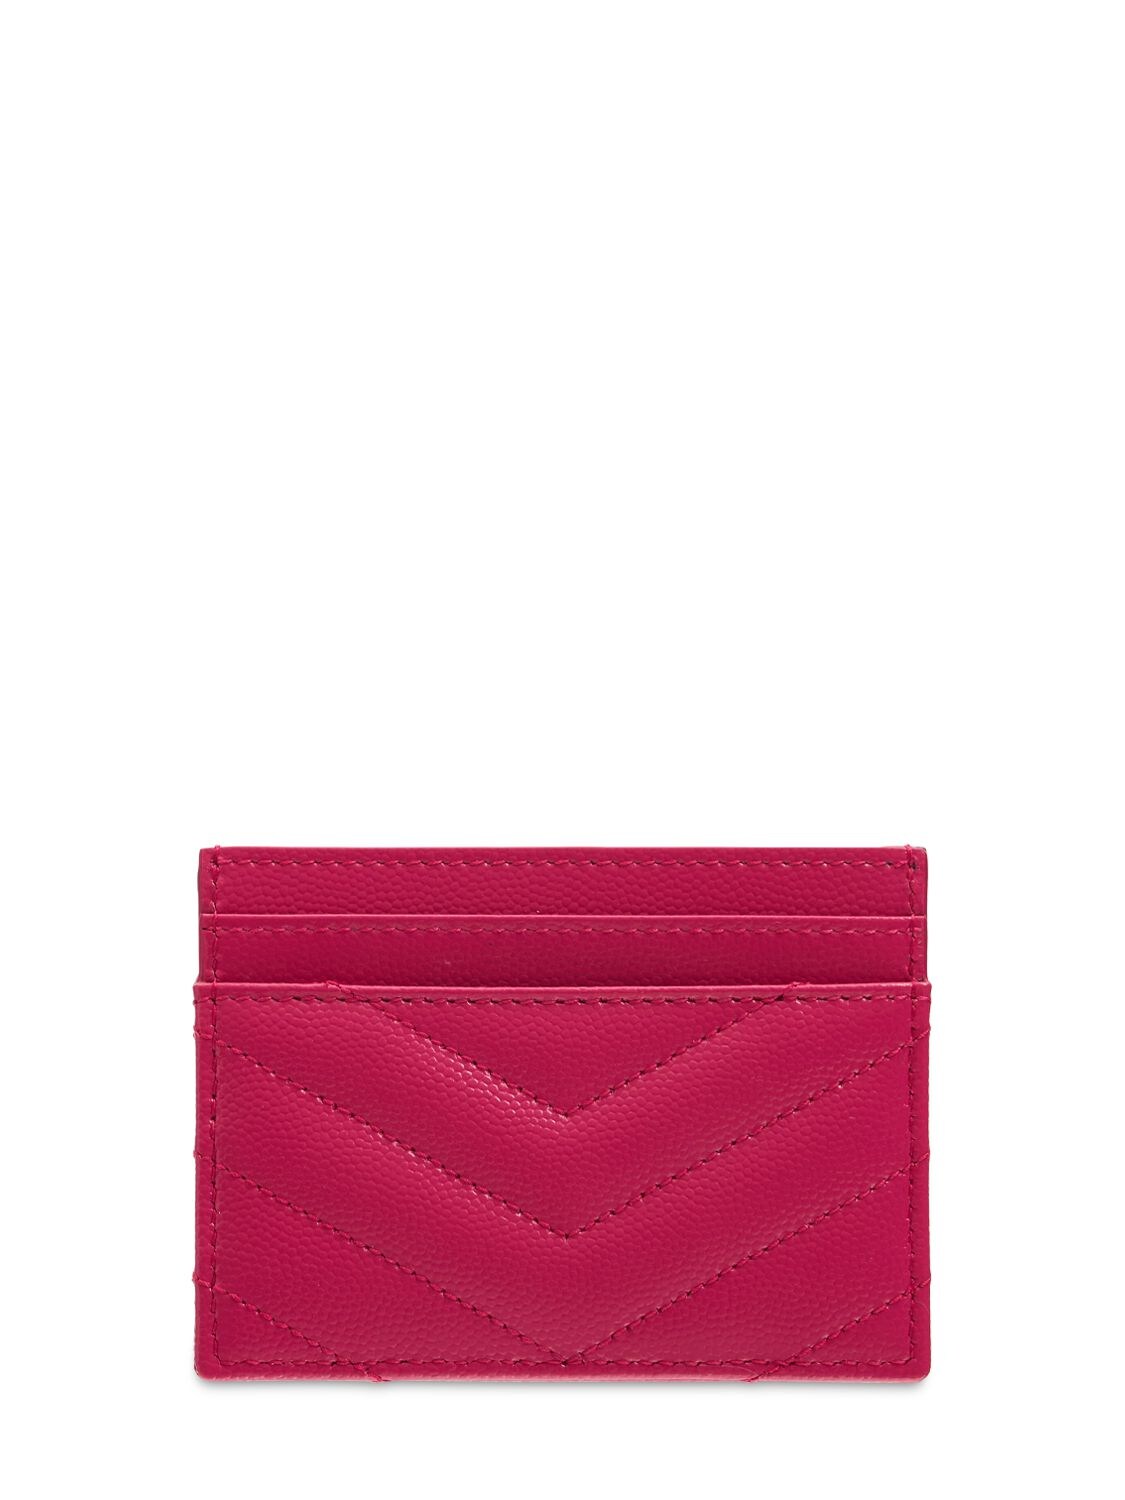 Saint Laurent Ysl Credit Card Holder In Fuxia Cout